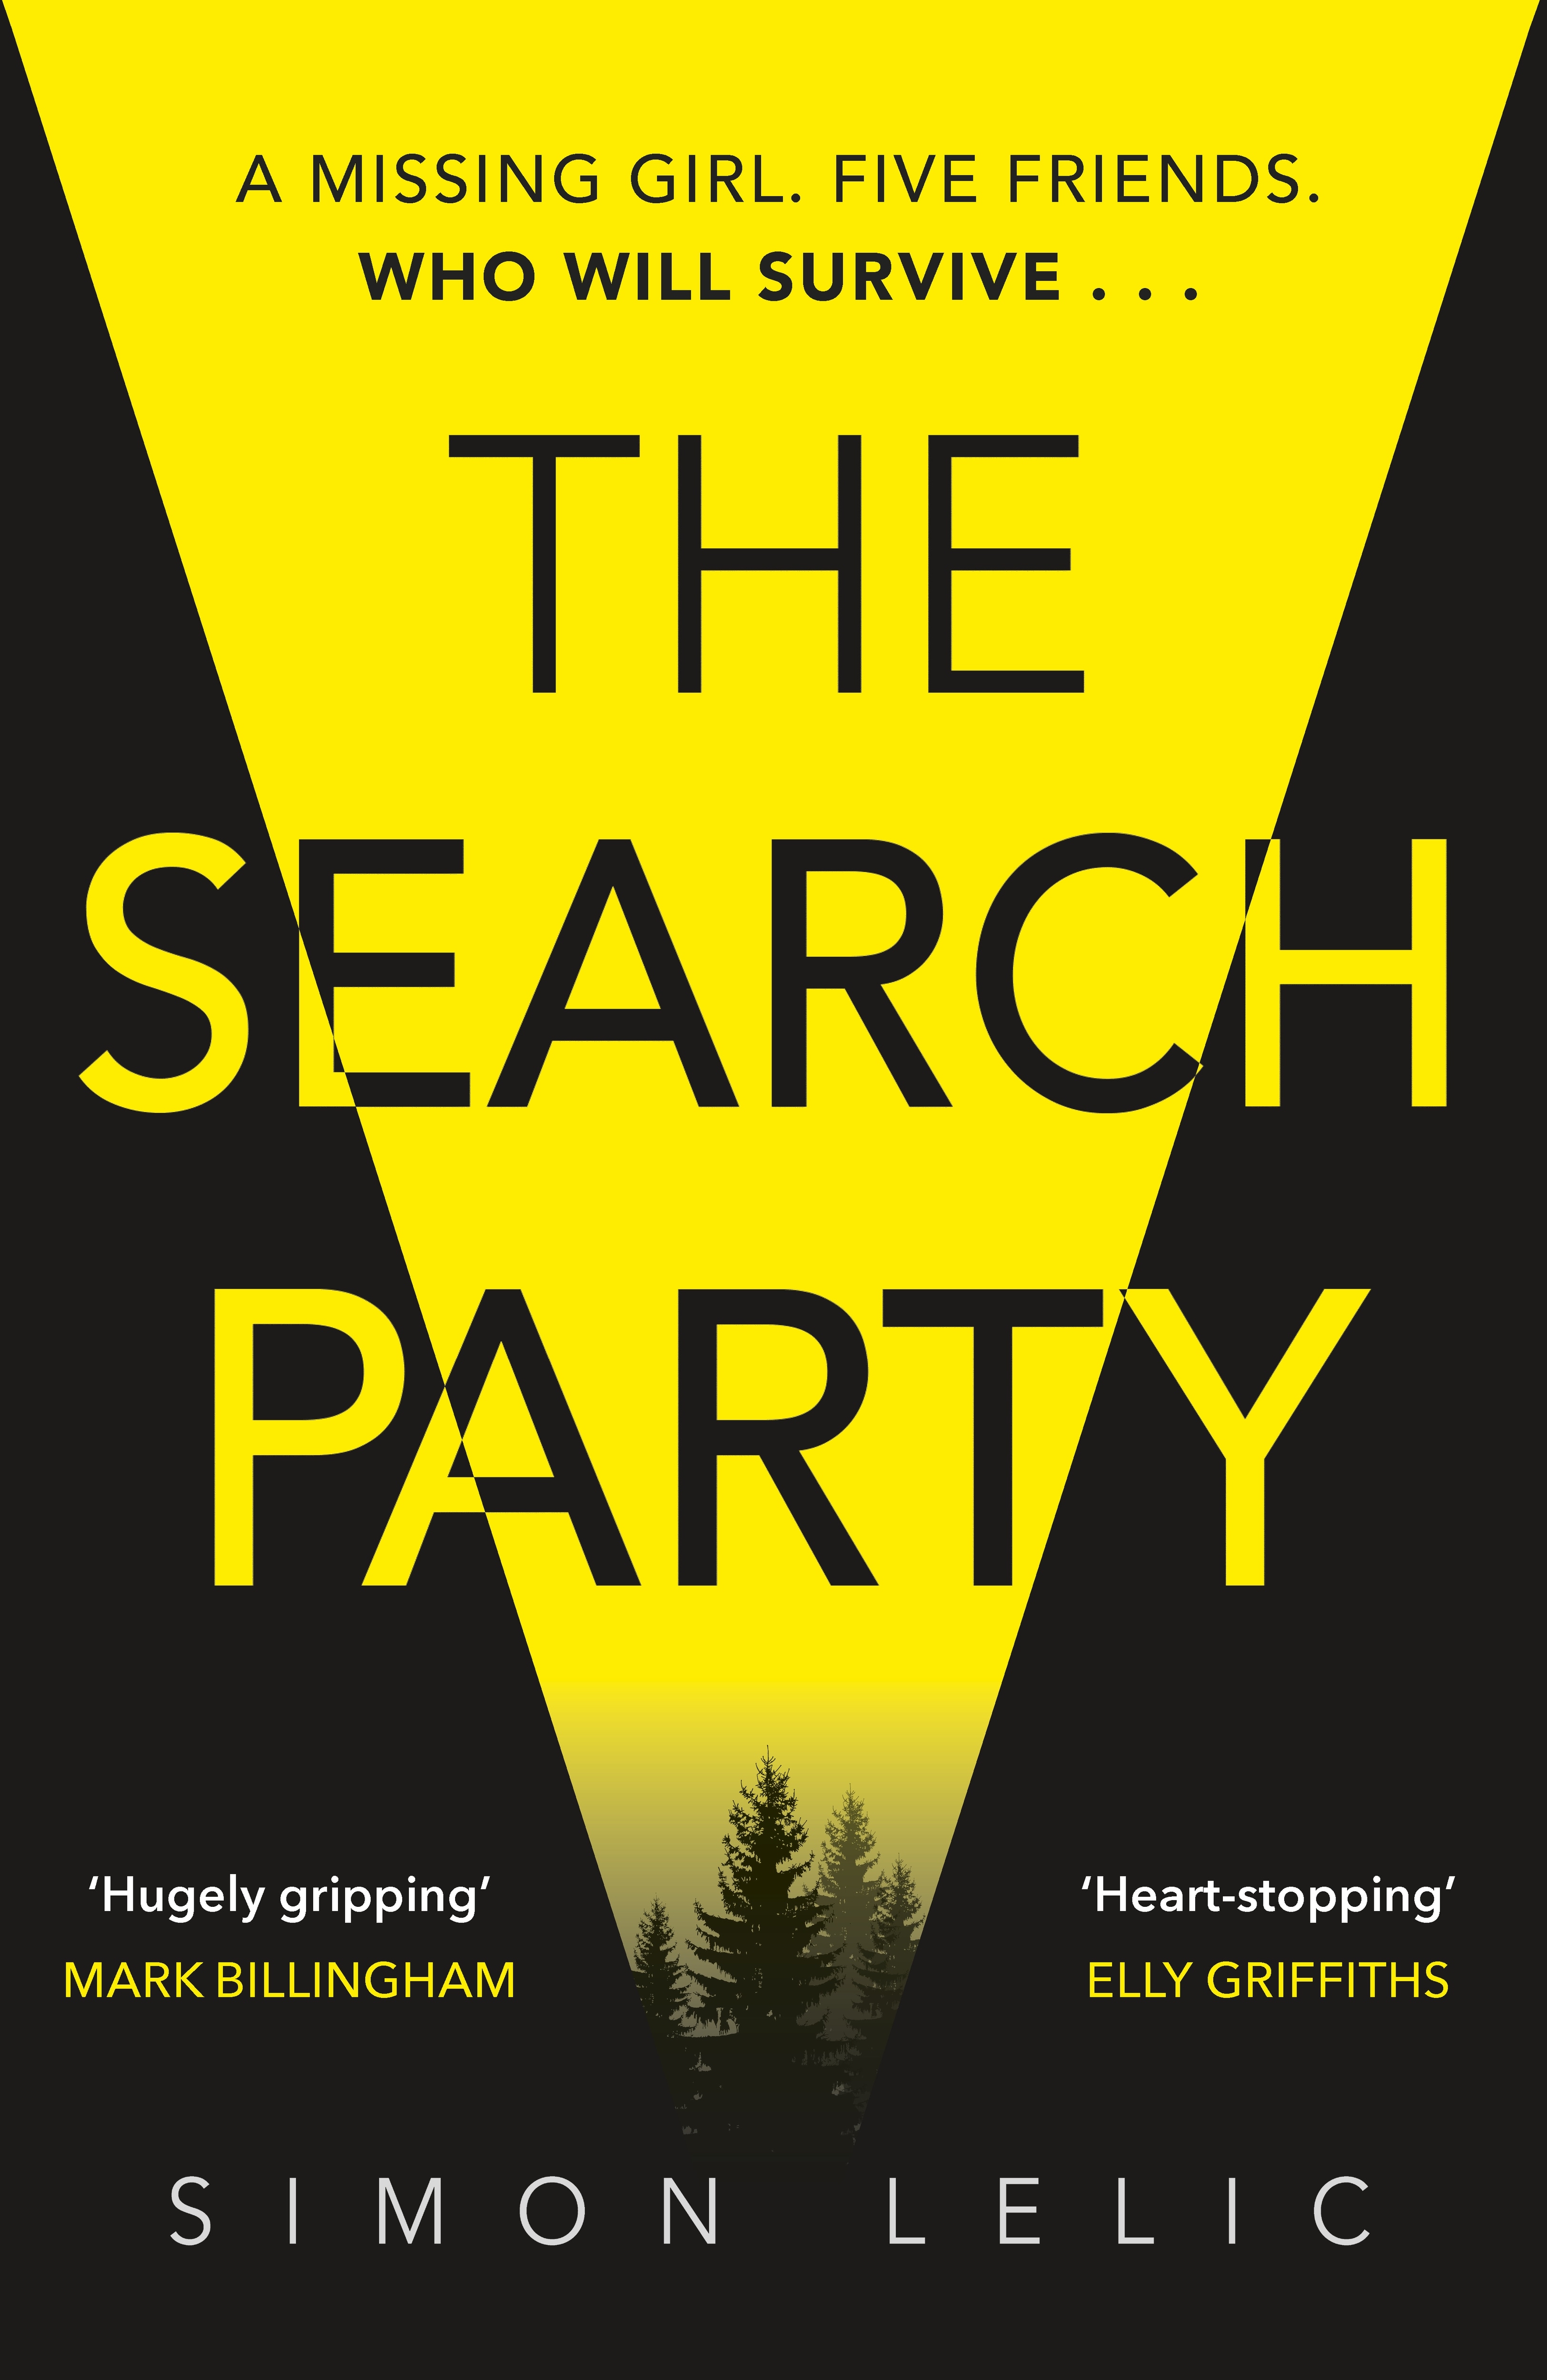 Book “The Search Party” by Simon Lelic — August 20, 2020